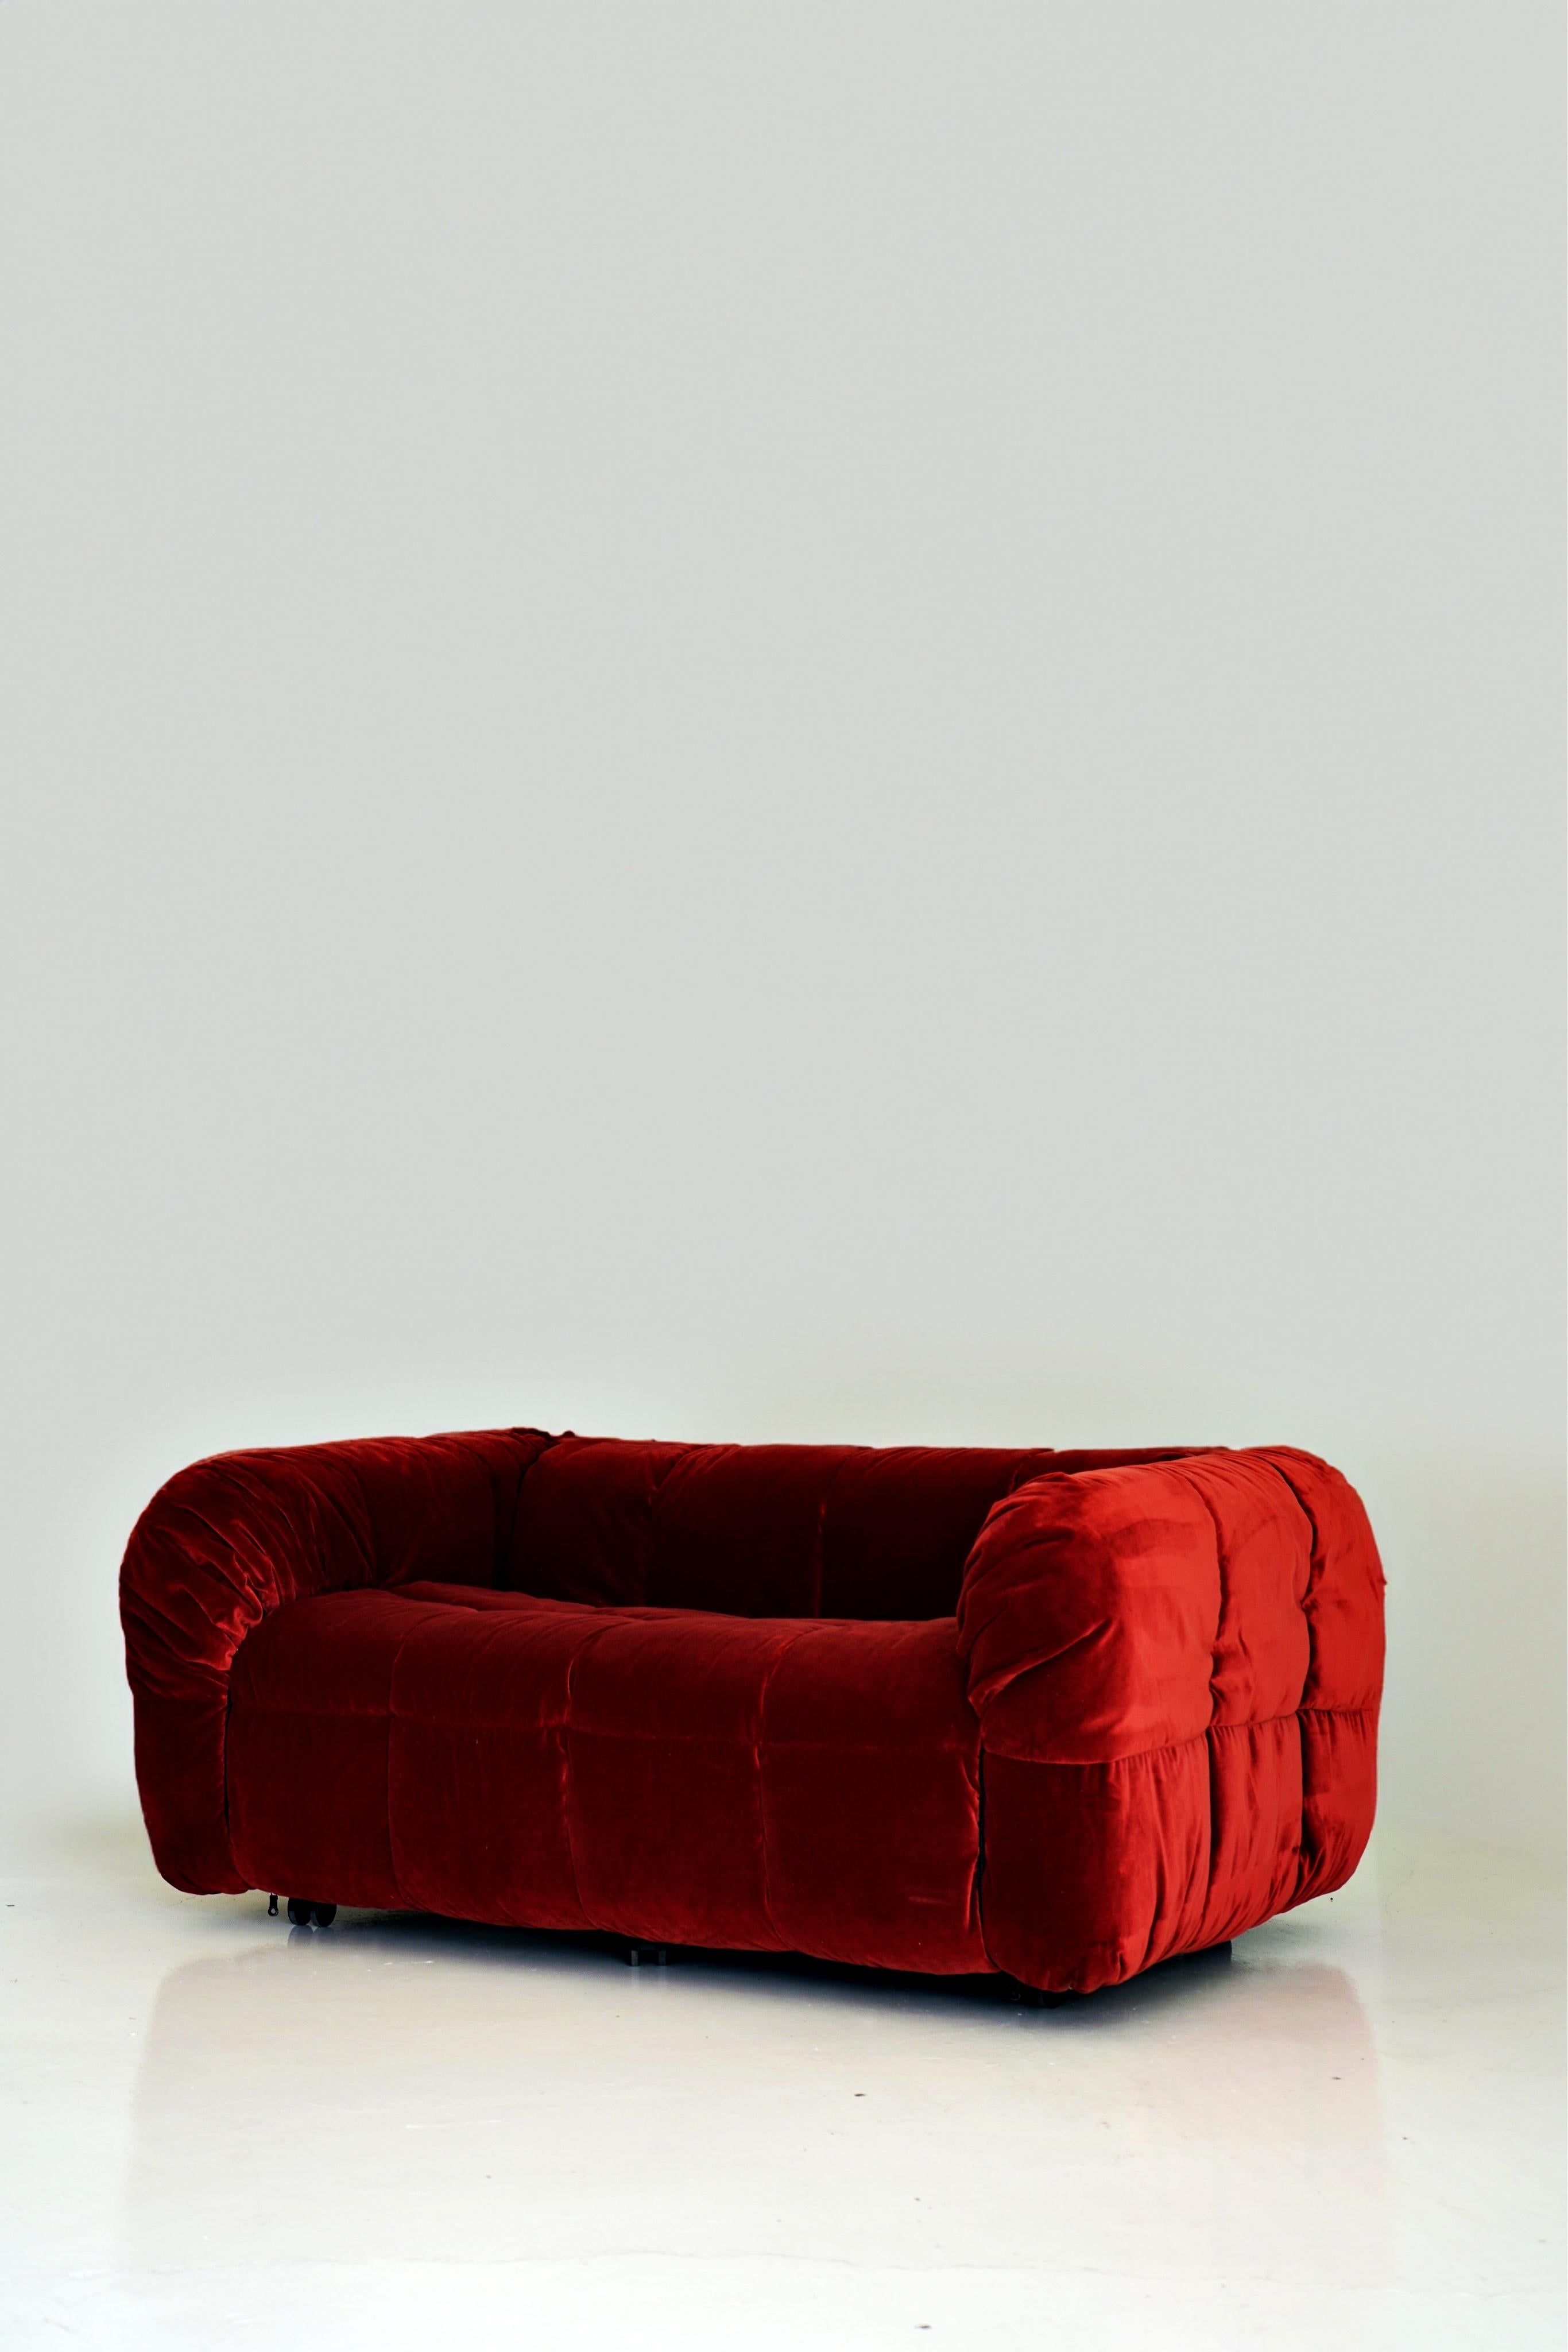 Designed in 1968 by iconic Italian architect Cini Boeri. Polyurethane foam wrapped in a removable puffy quilt. The designer’s and manufacturer’s most famous furniture design, the fully modular system of sofas called 